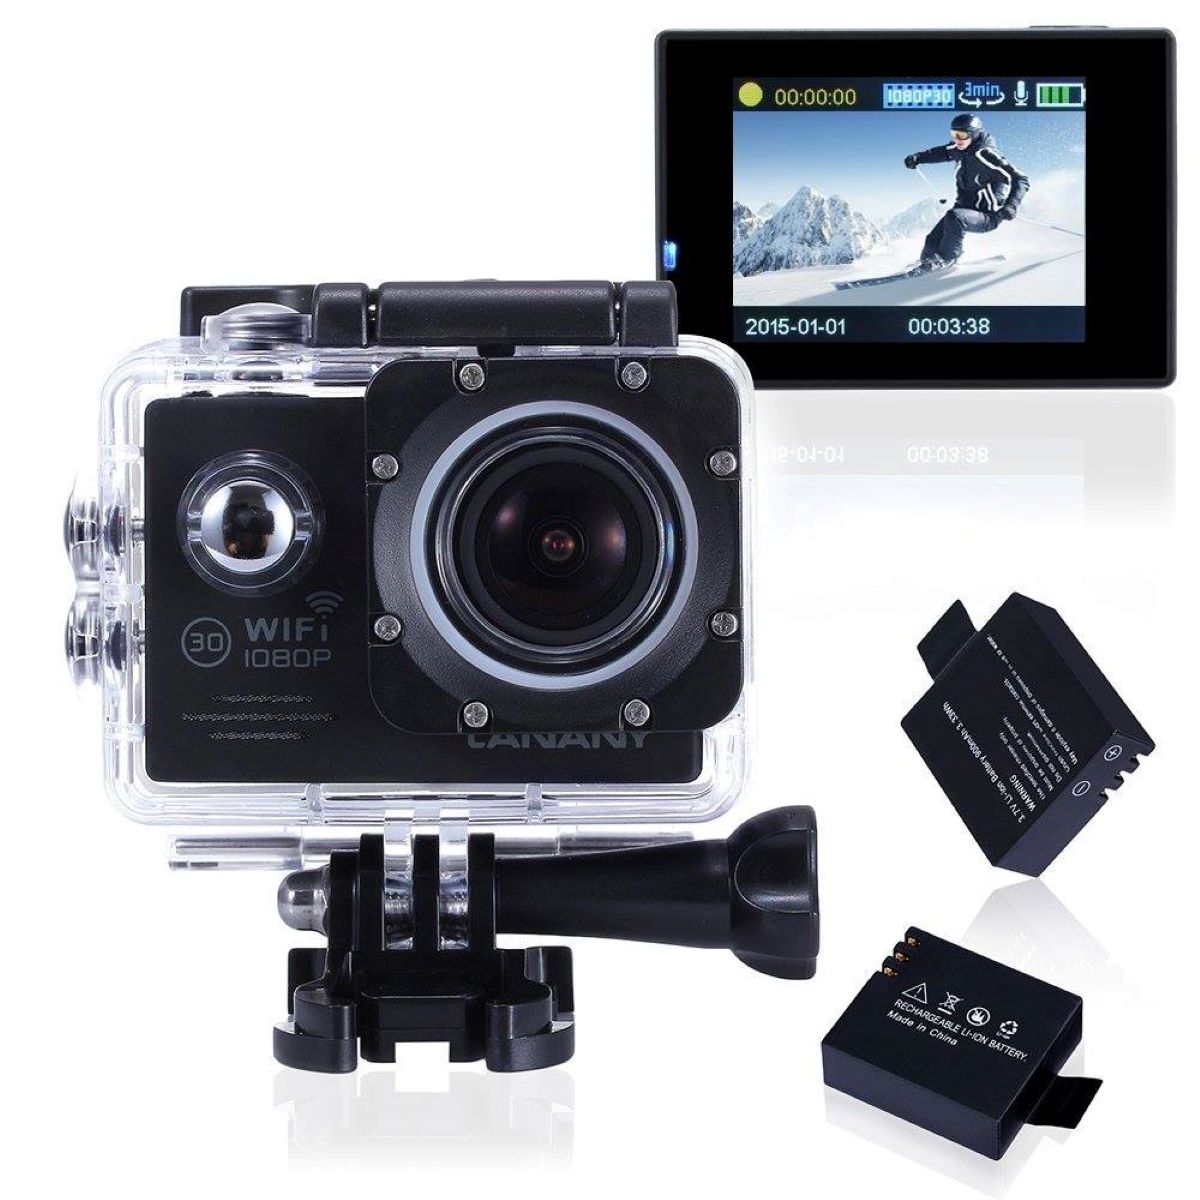 canany-wi-fi-action-camera-how-to-take-pictures